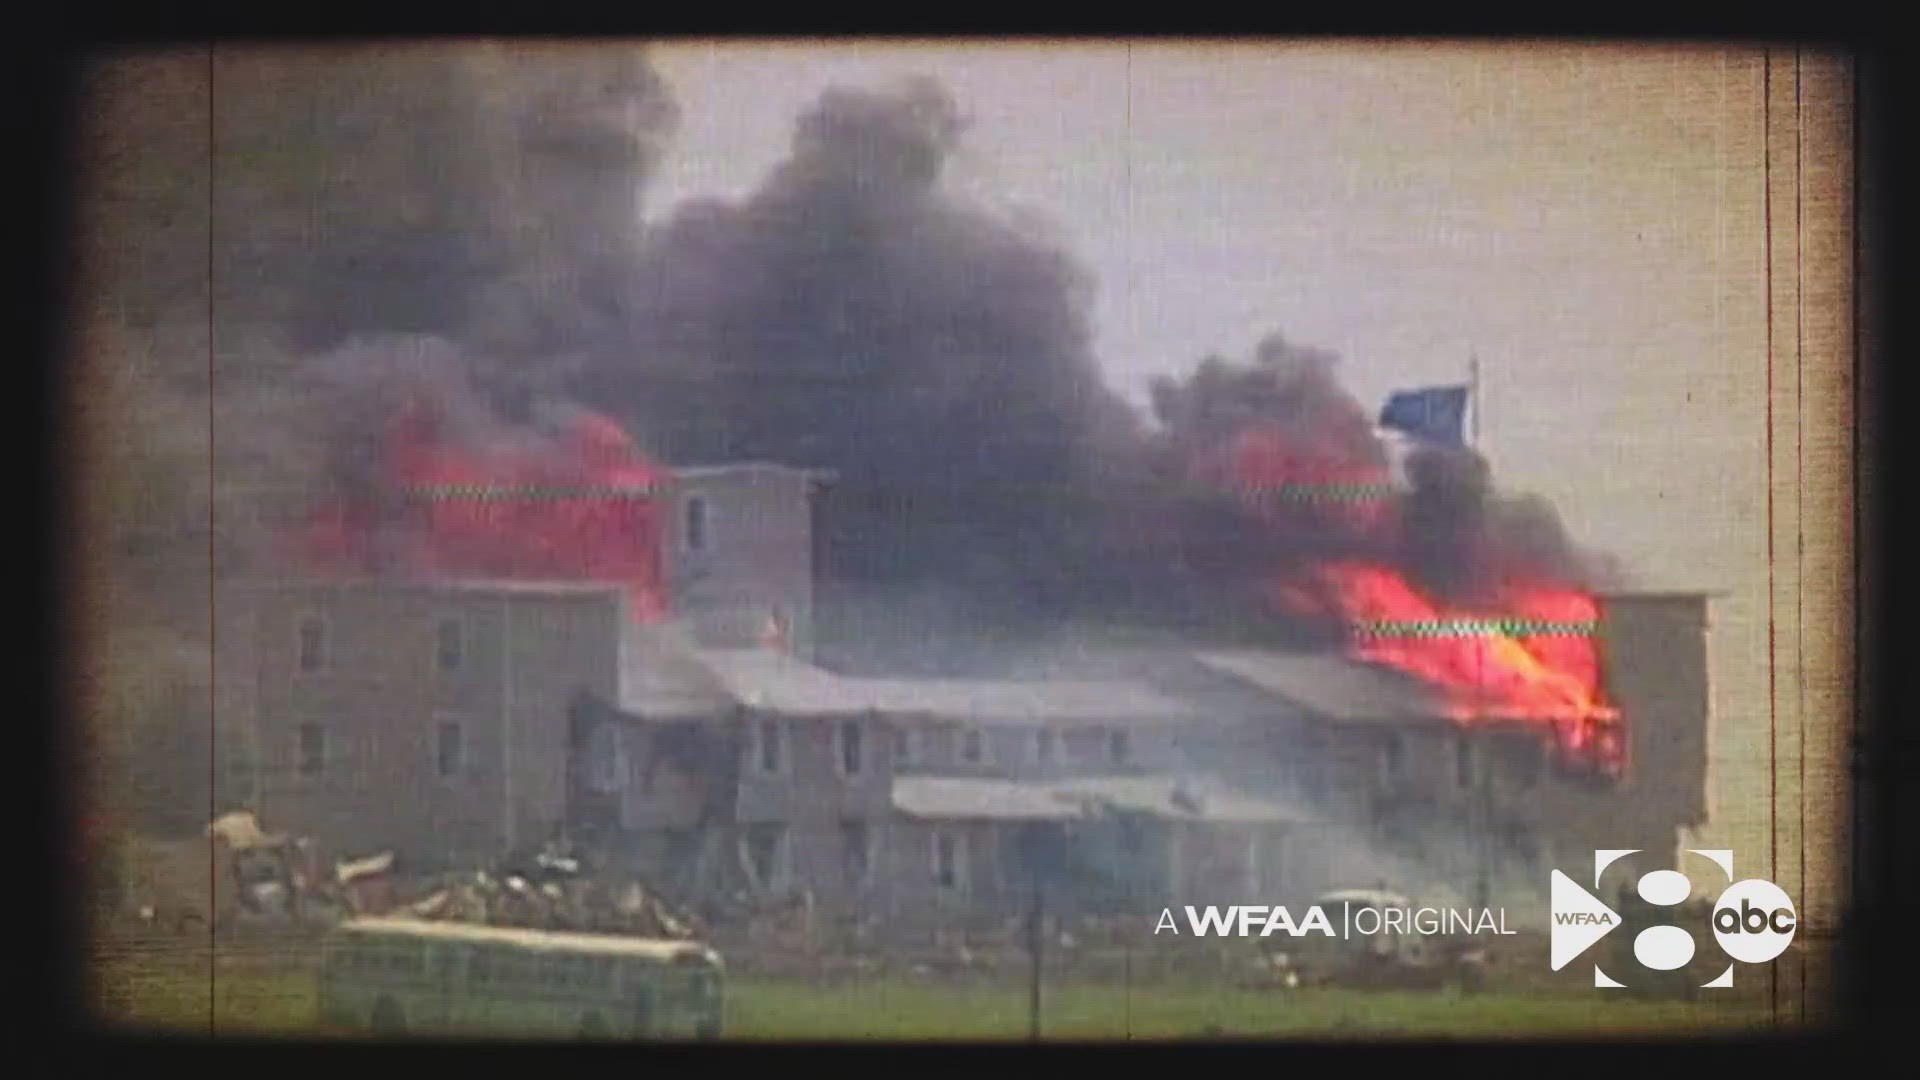 Thirty years ago, a religious cult leader led his followers to their deaths -- 82 Branch Davidians, including 28 children, were killed during the 51-day standoff.